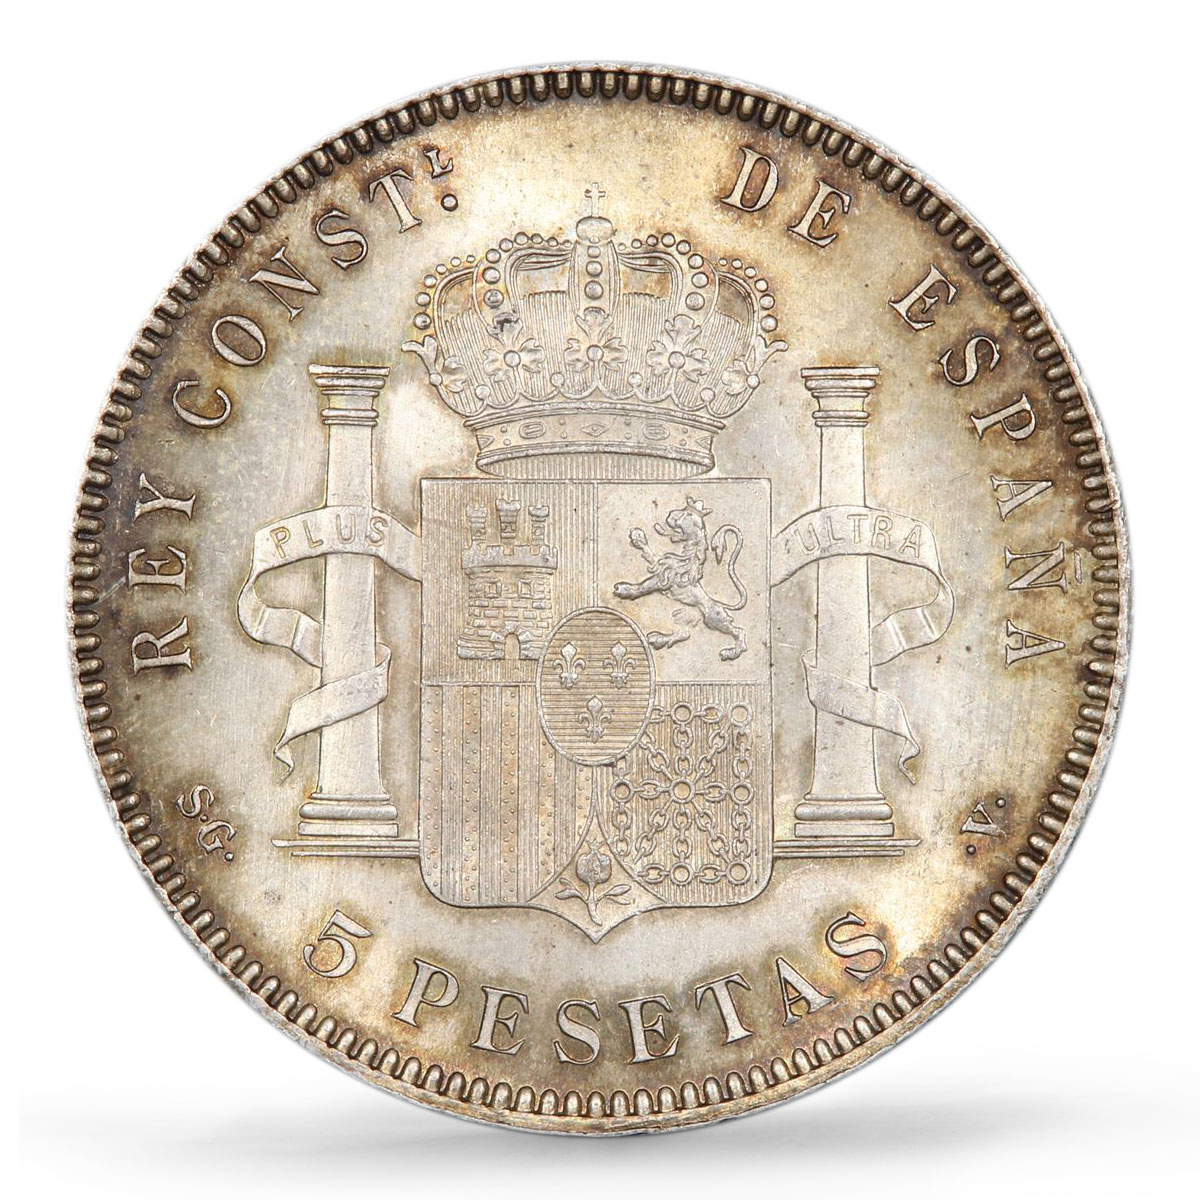 Spain 5 pesetas Regular Coinage Child Alfonso KM-707 MS64 PCGS silver coin 1899